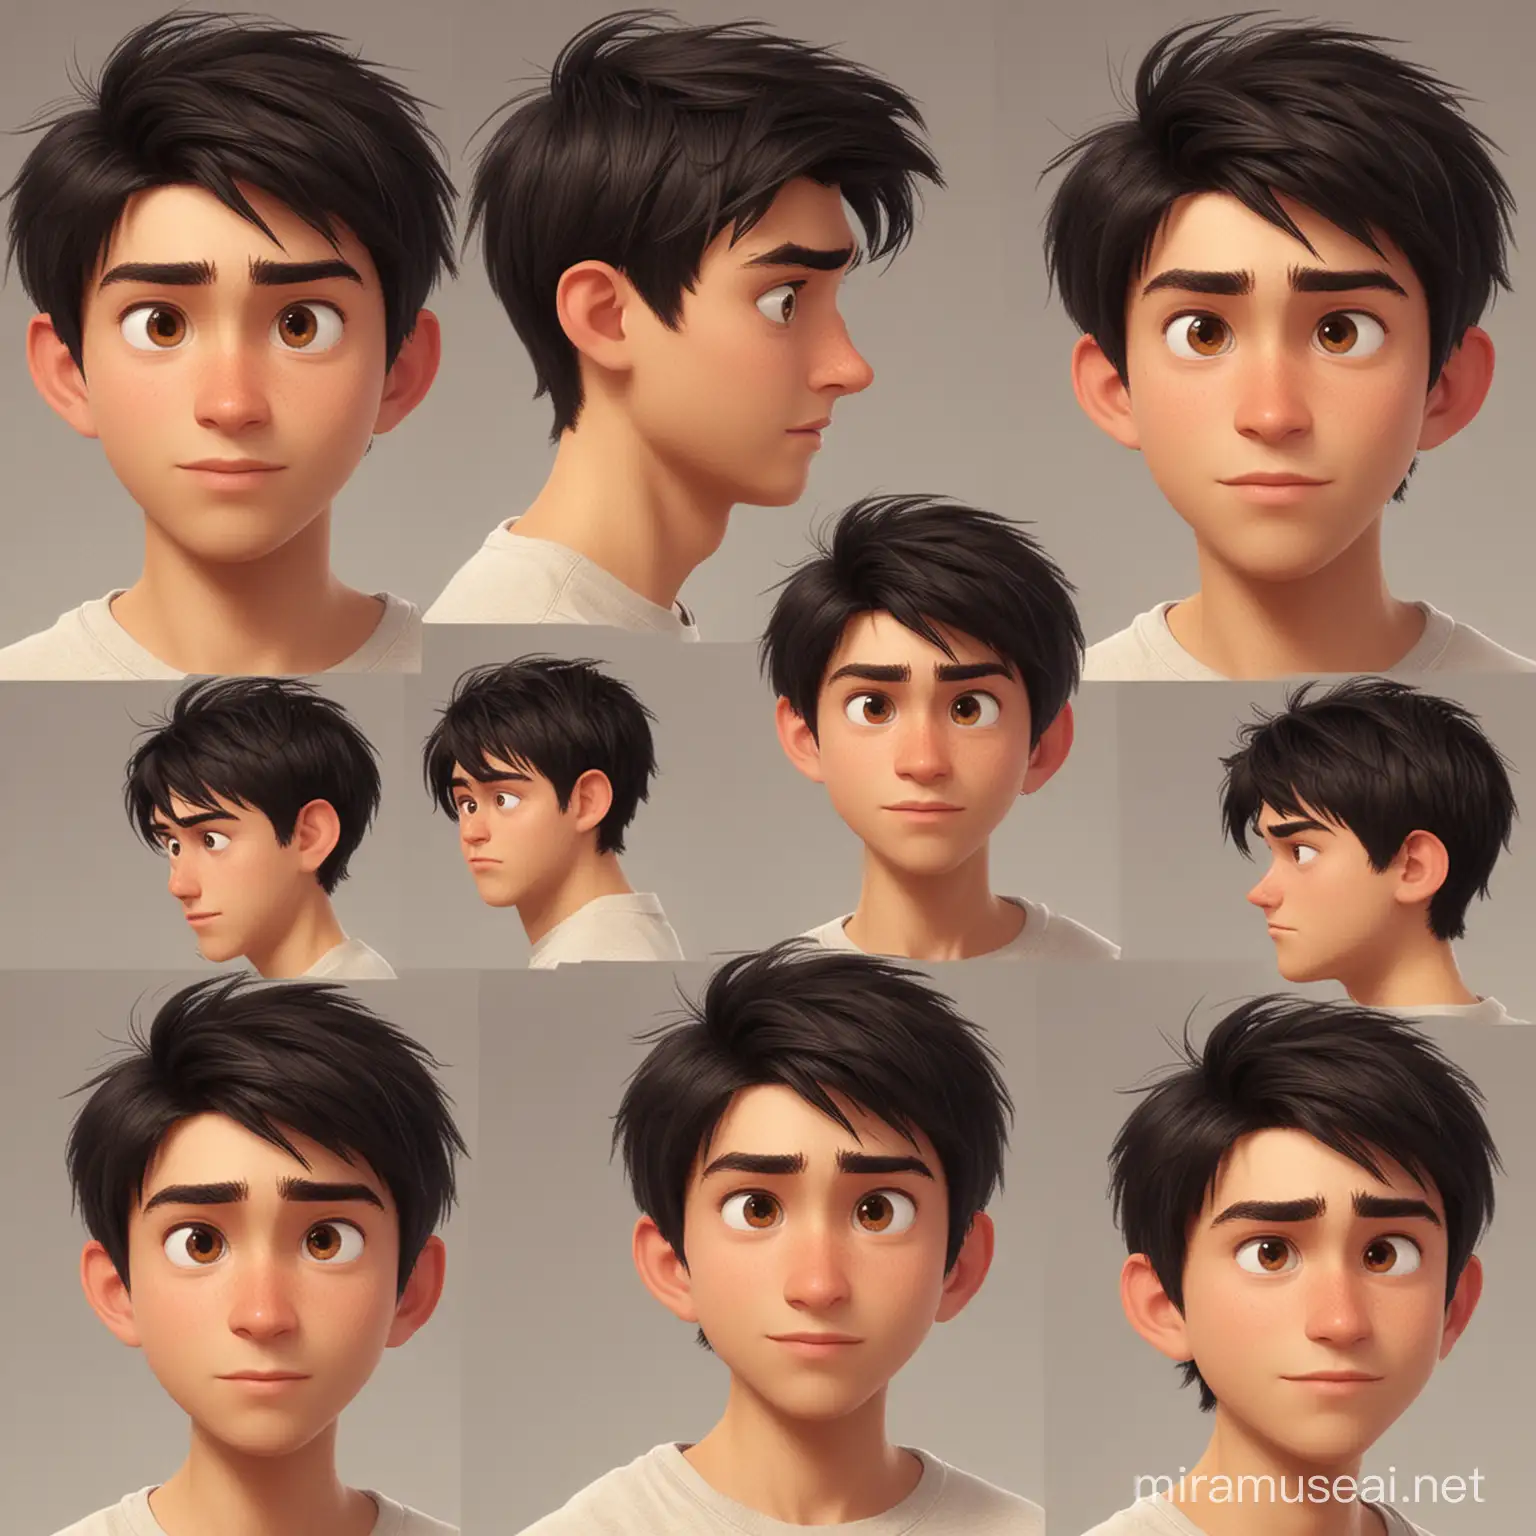 Adventures of Marvels Expressive Cartoon Character Sheet for 18YearOld Boy in Pixar Style